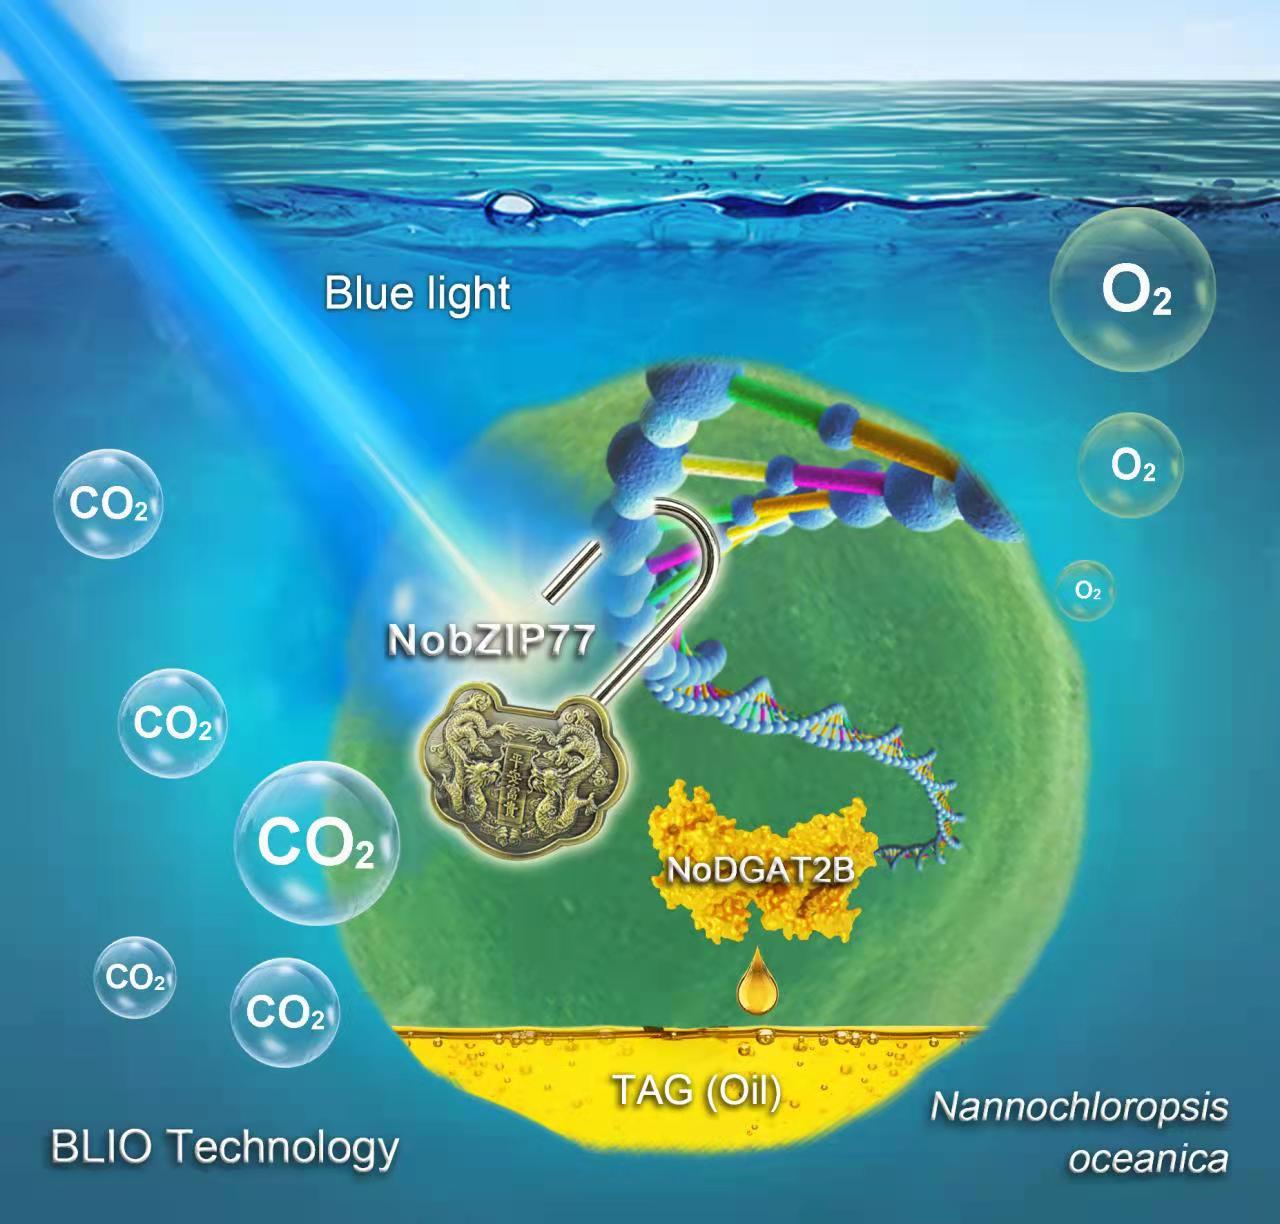 The BLIO technology explores a "genetic switch" to unlock oil production in microalgae